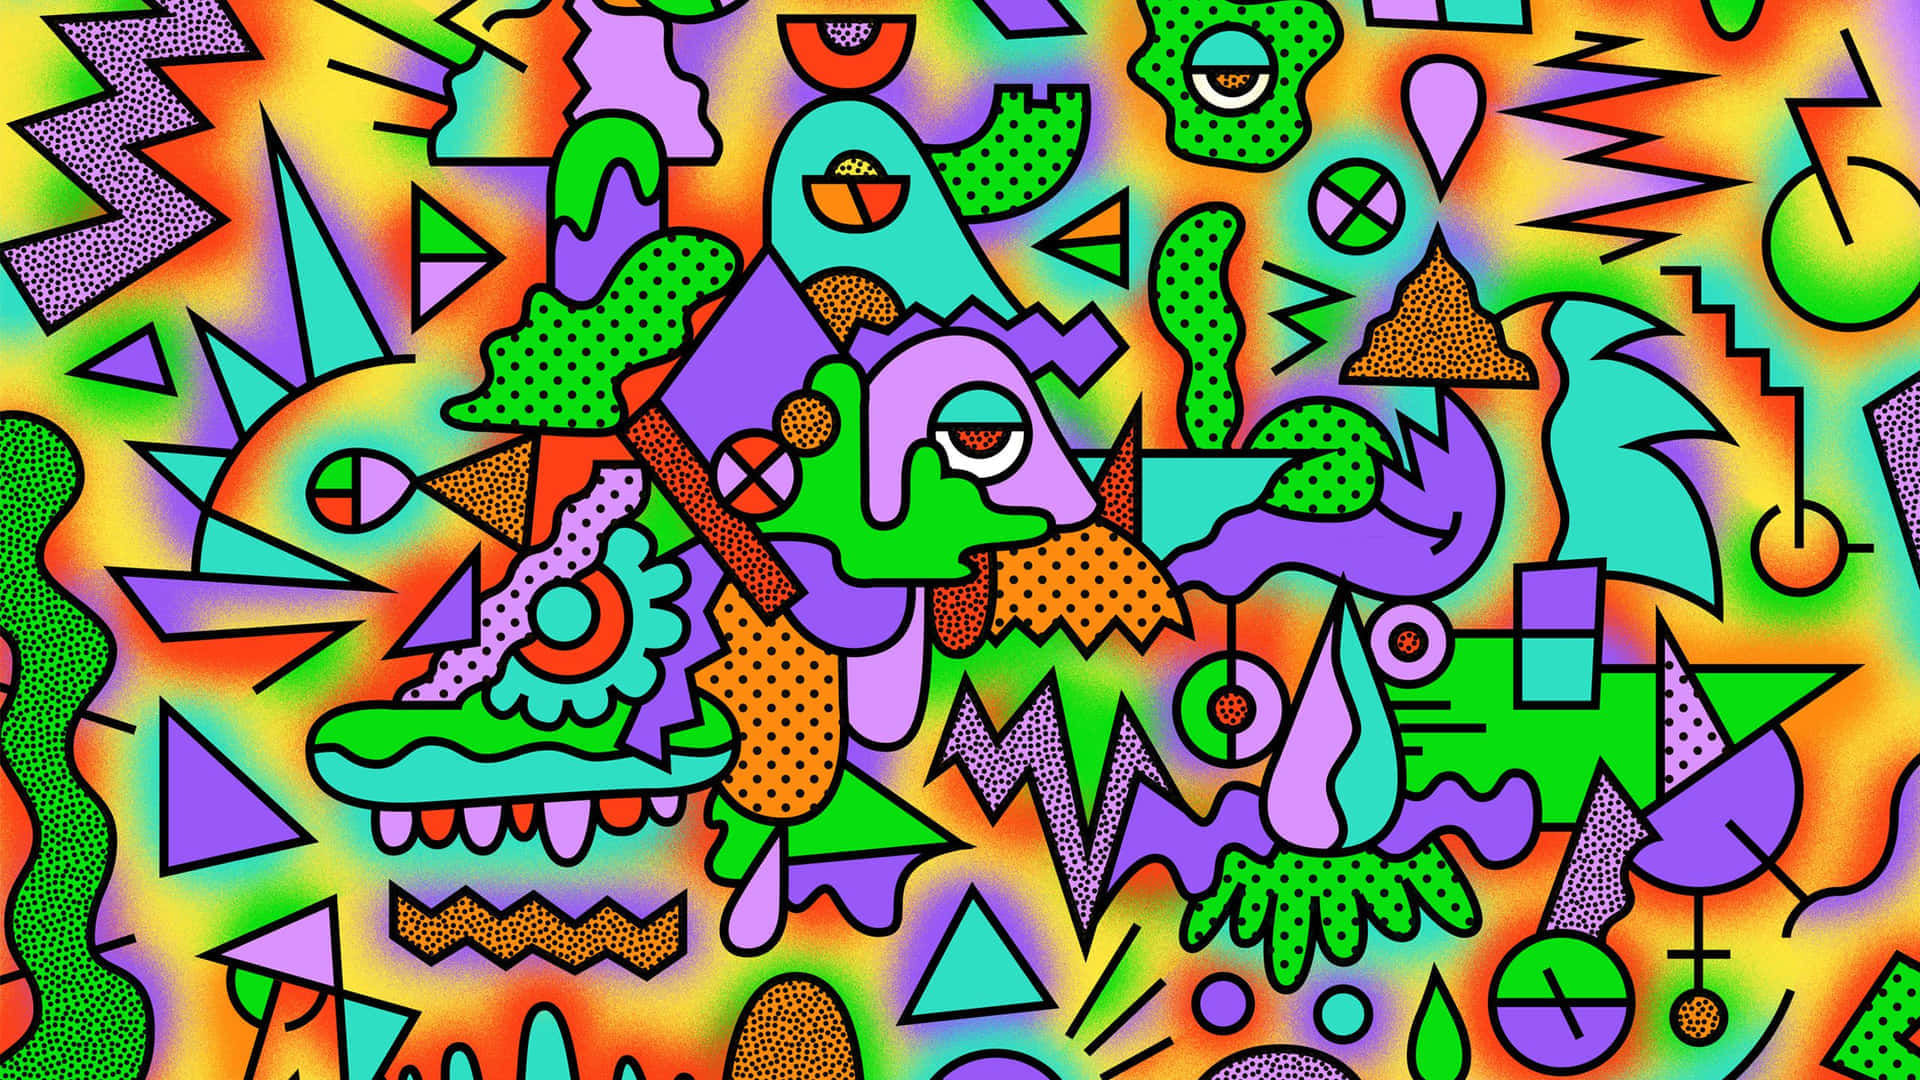 A Colorful Psychedelic Art Piece With Many Different Shapes